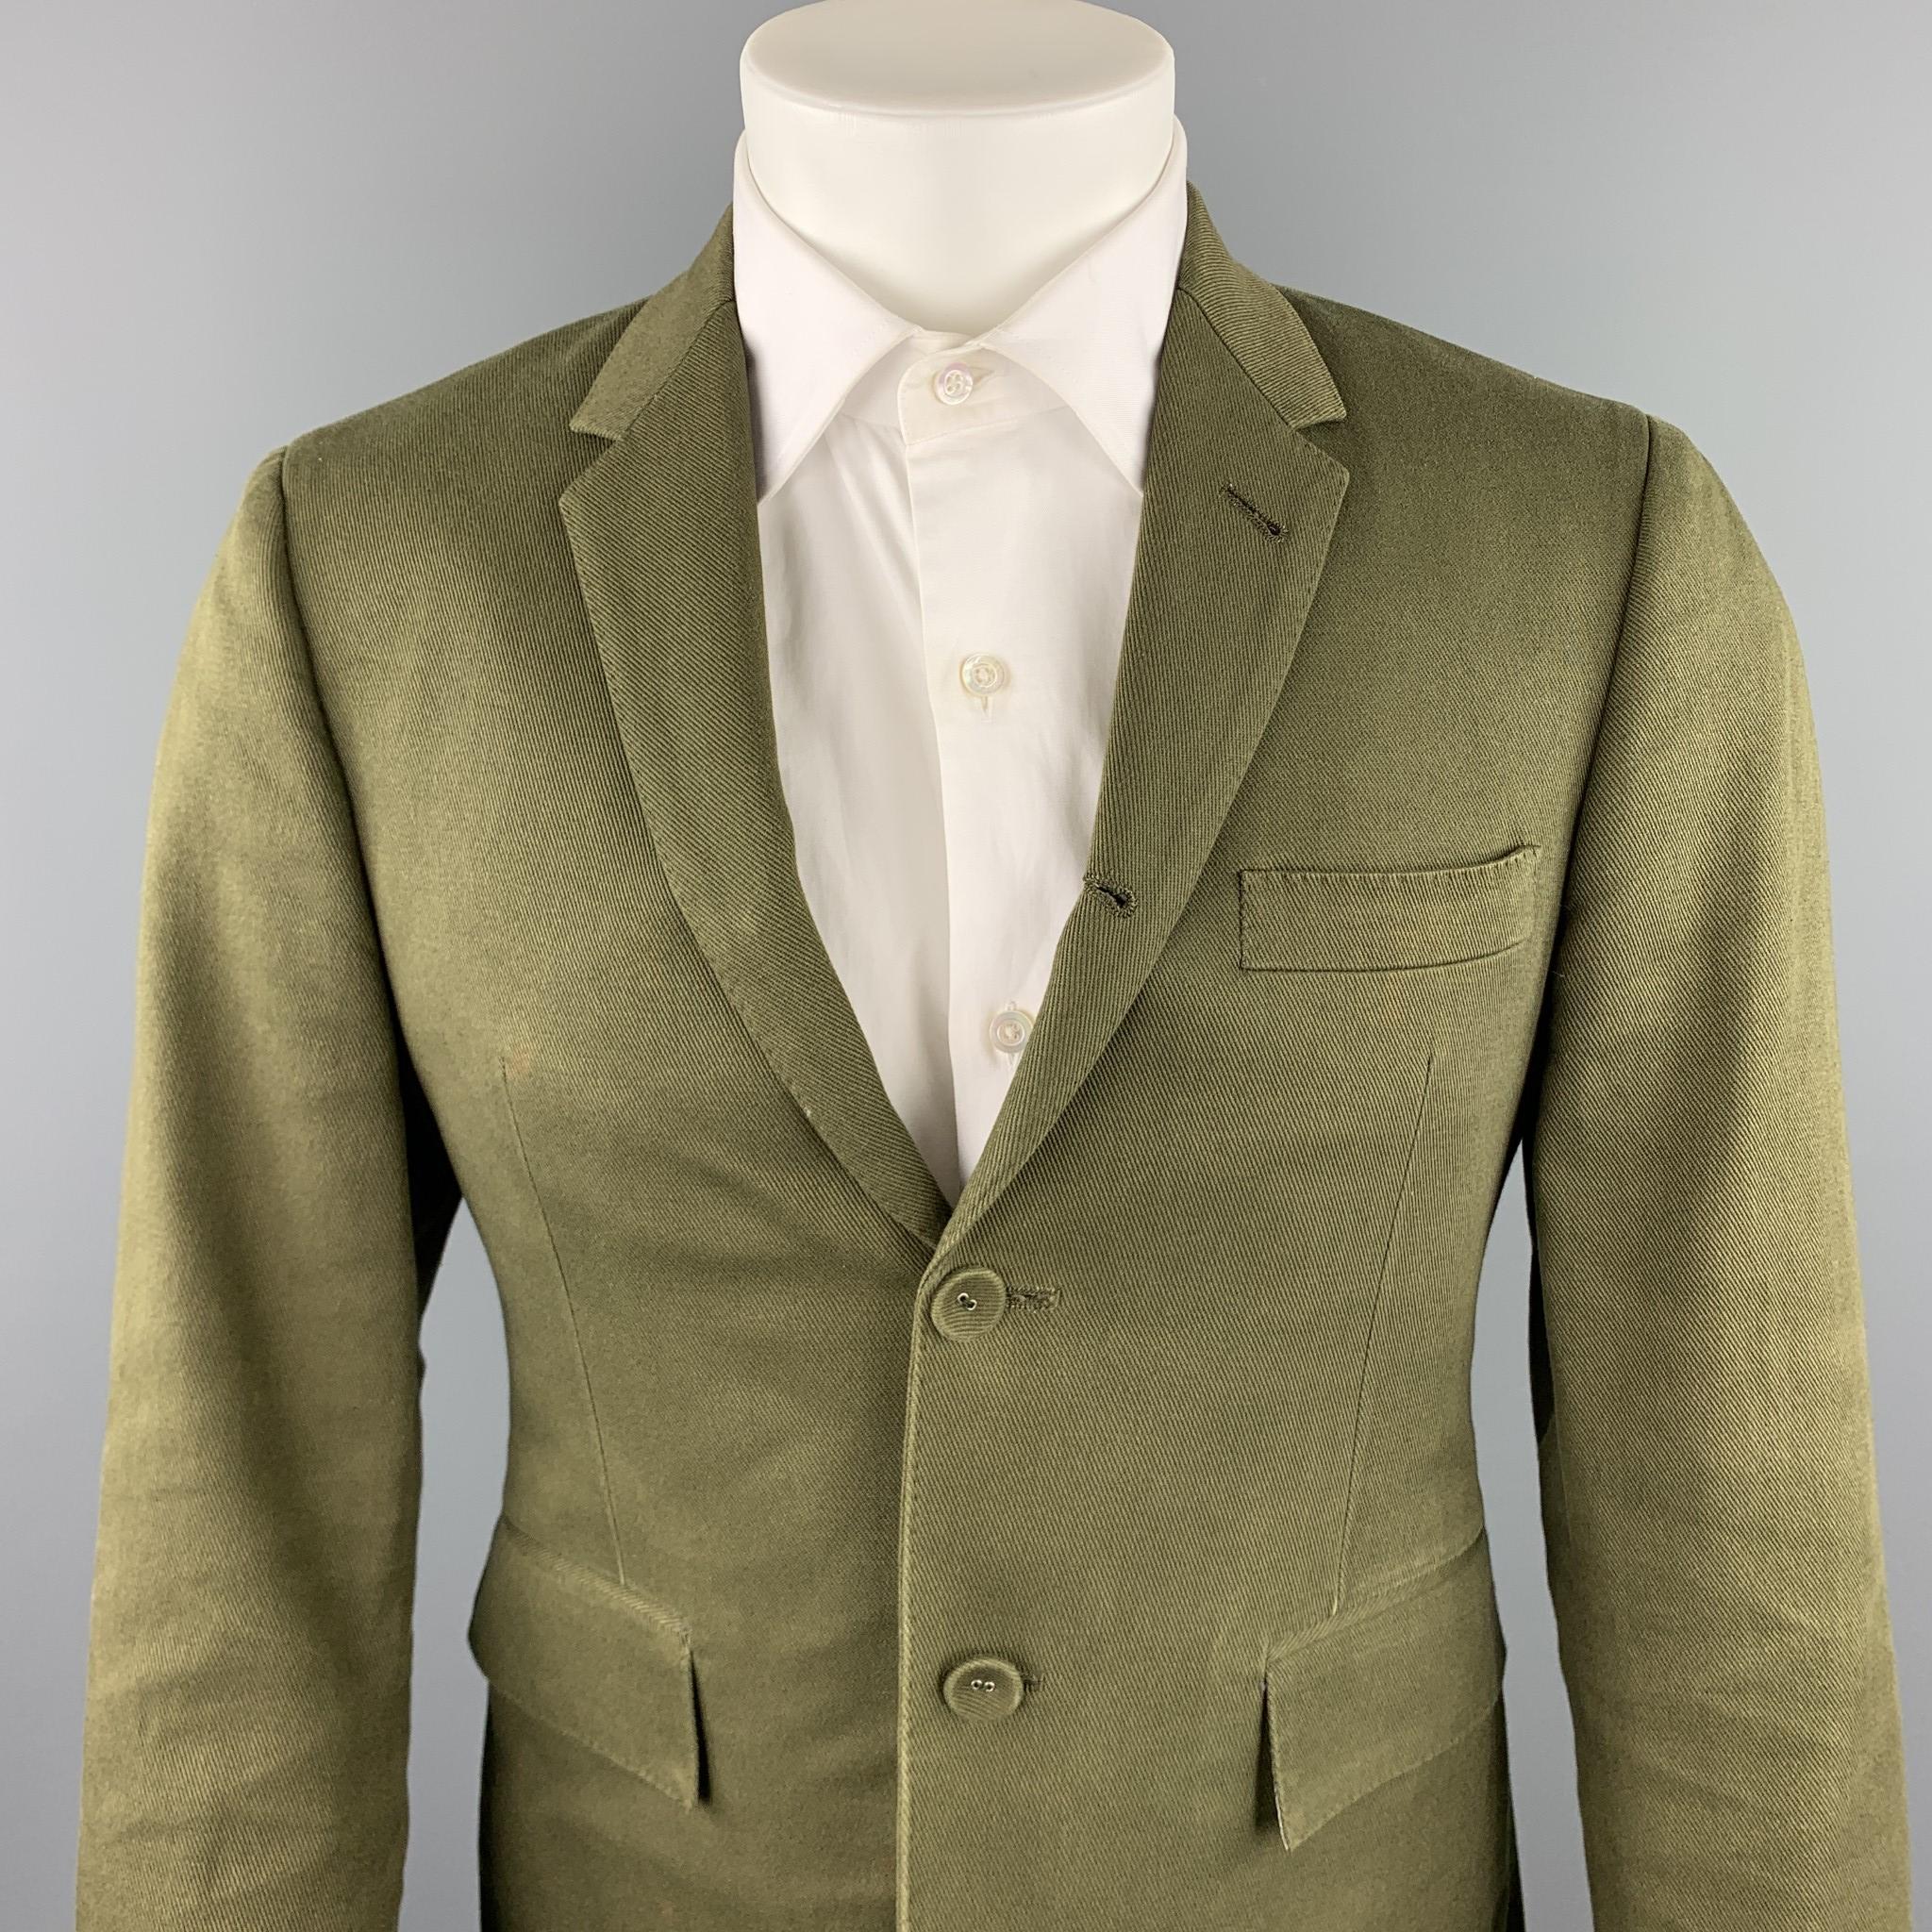 THOM BROWNE sport coat comes in a olive cotton with a full stripe liner featuring a notch lapel, flap pockets, and a two button closure. Minor discoloration. As-Is. Made in Japan.

Good Pre-Owned Condition.
Marked: 1

Measurements:

Shoulder: 17 in.